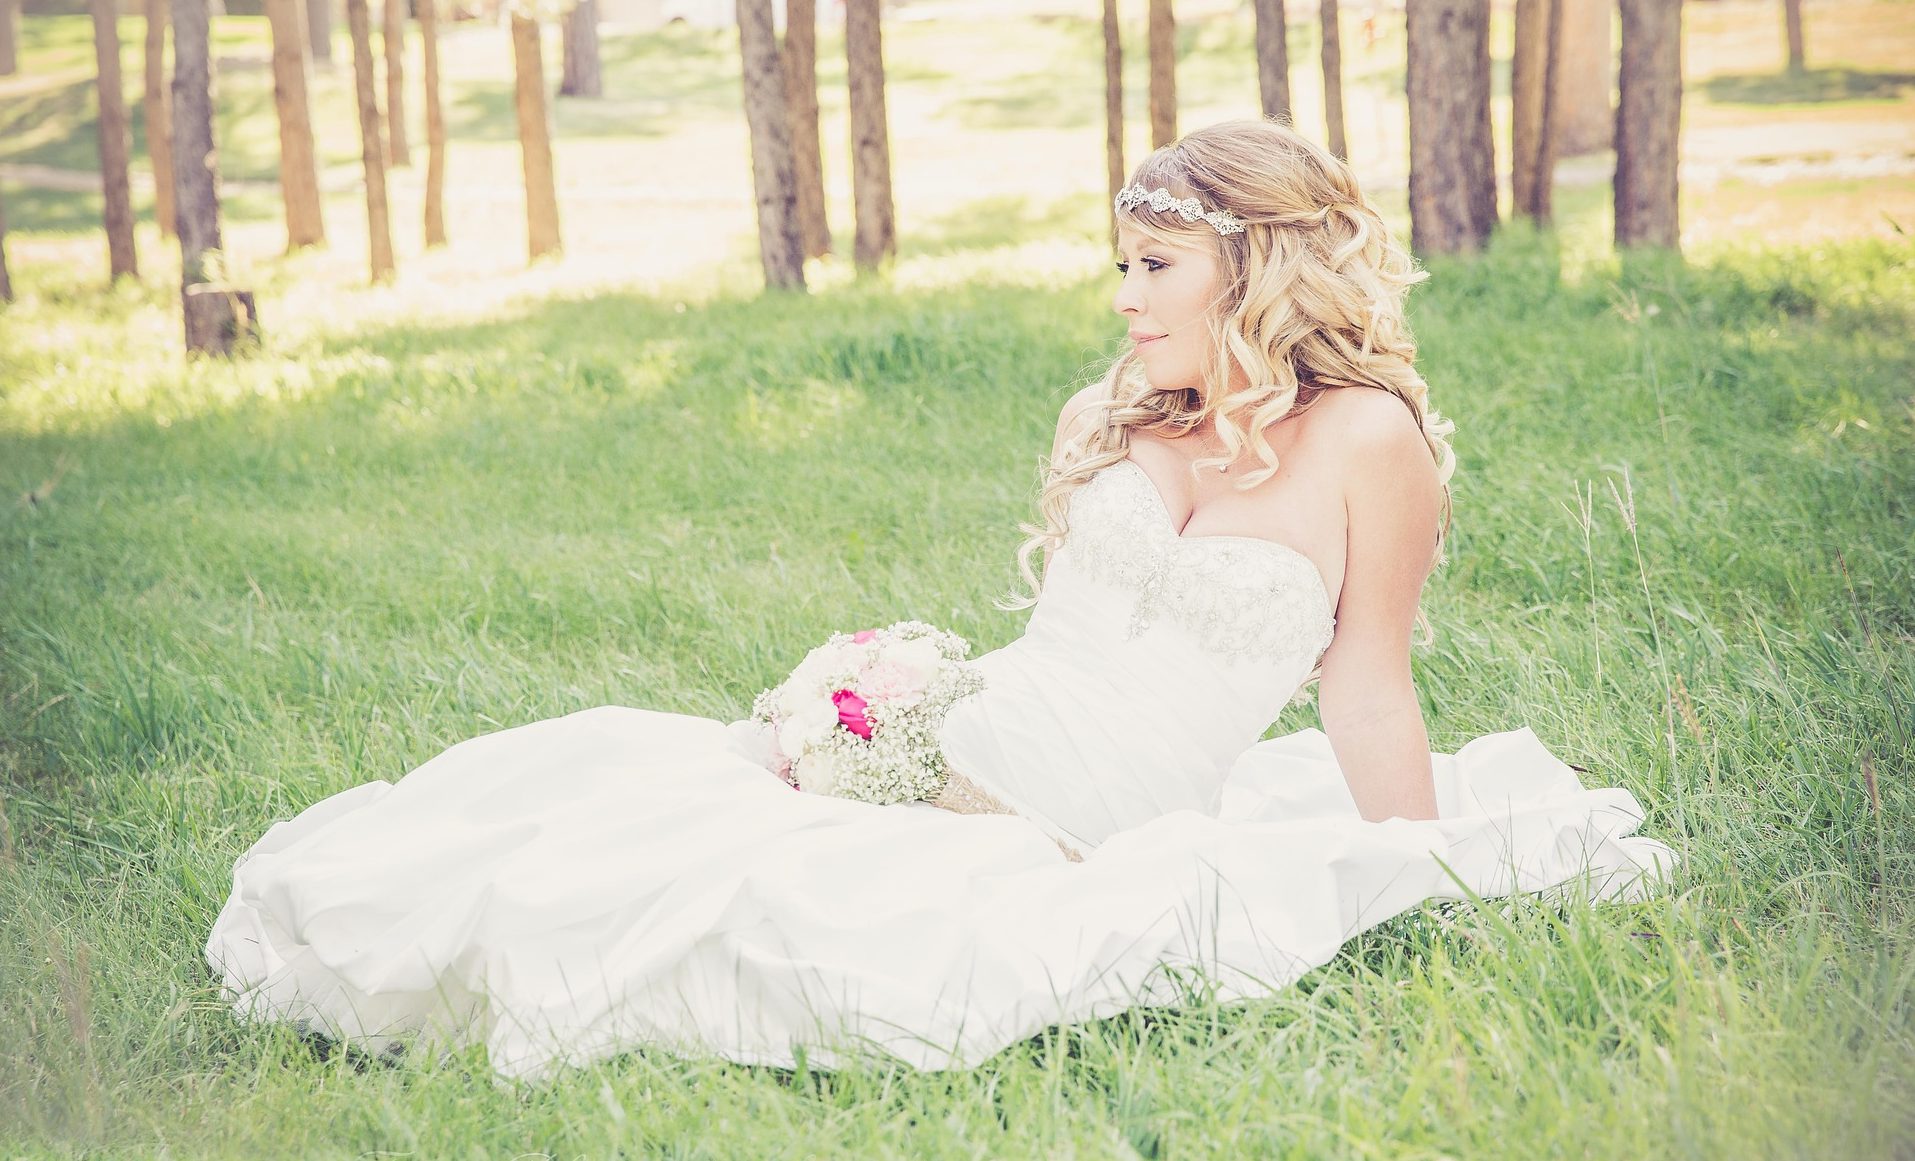 The Ultimate 12-Step Bride Beauty Guide